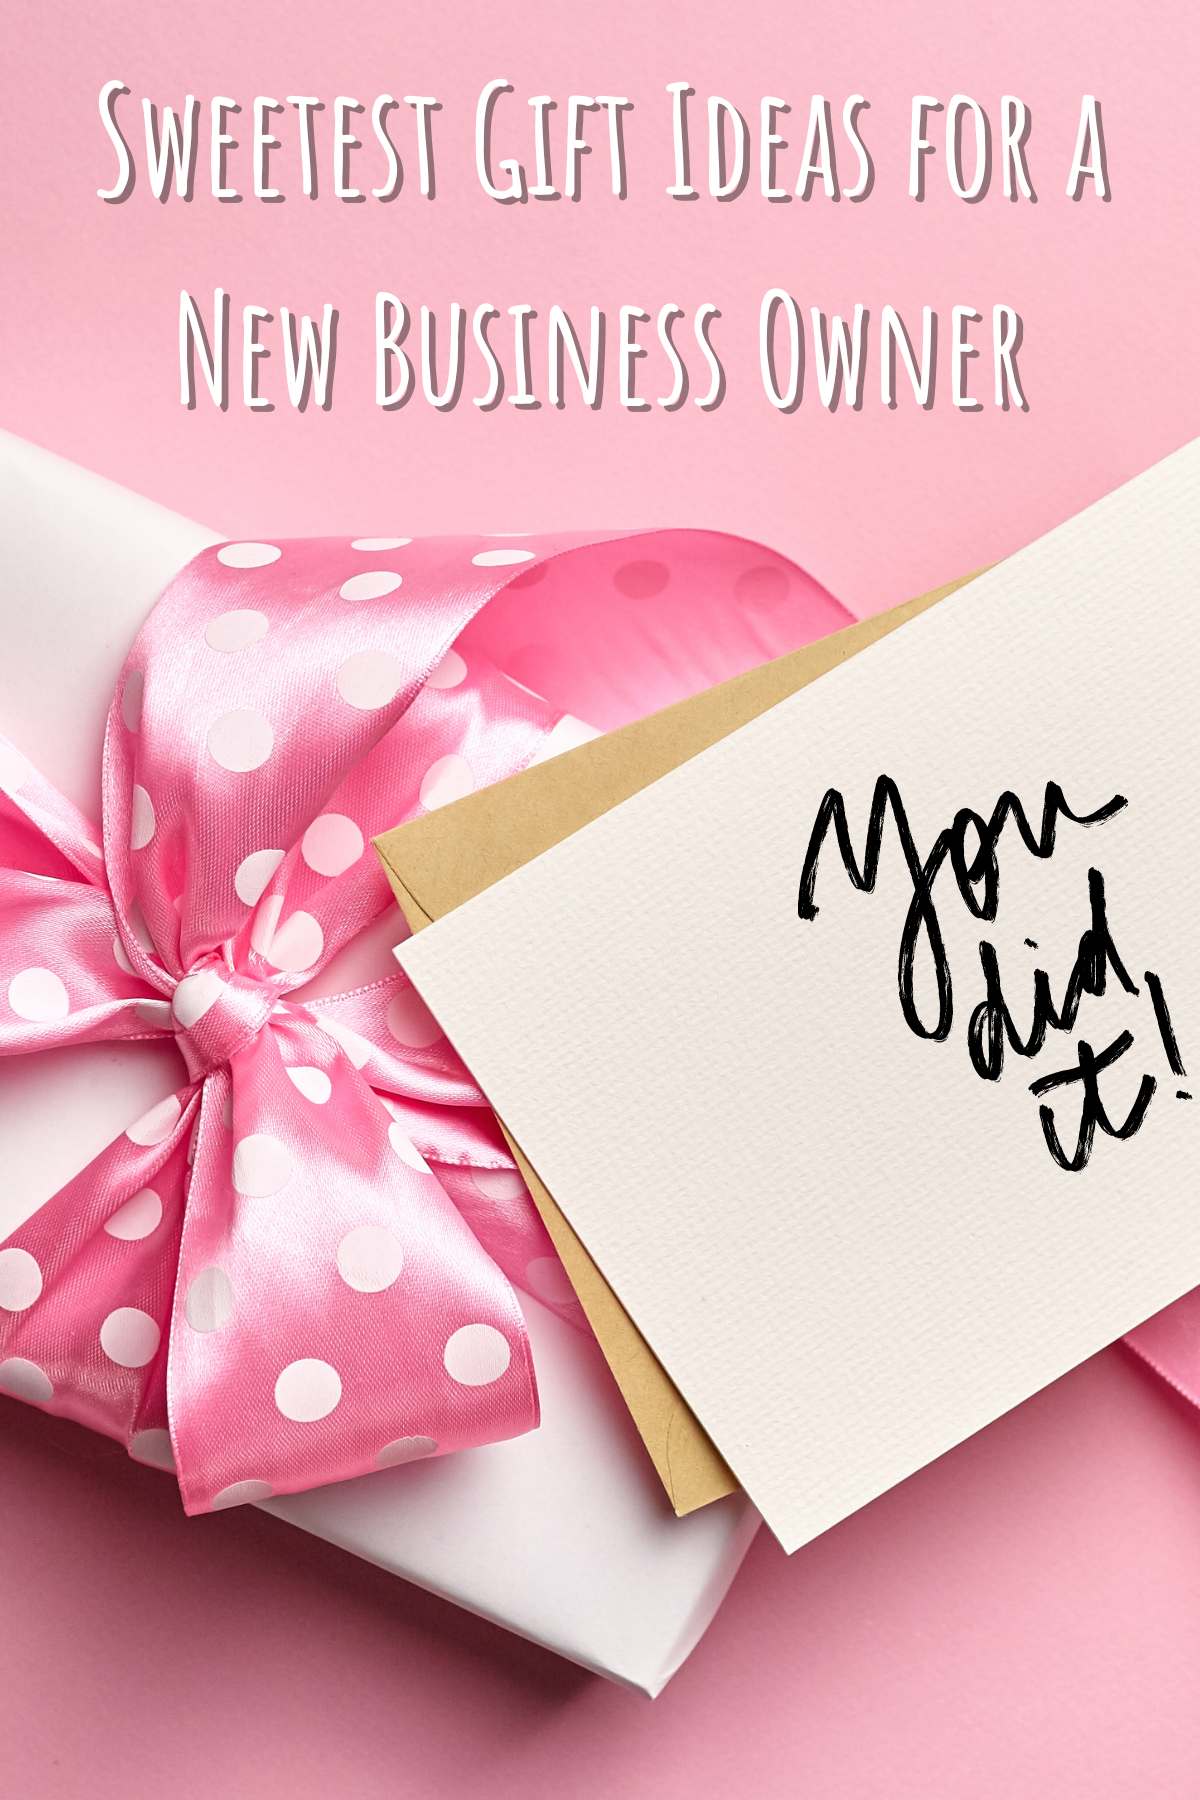 Sweet gift ideas for a new business owner. Photo of pink present and a card that says 'you did it'